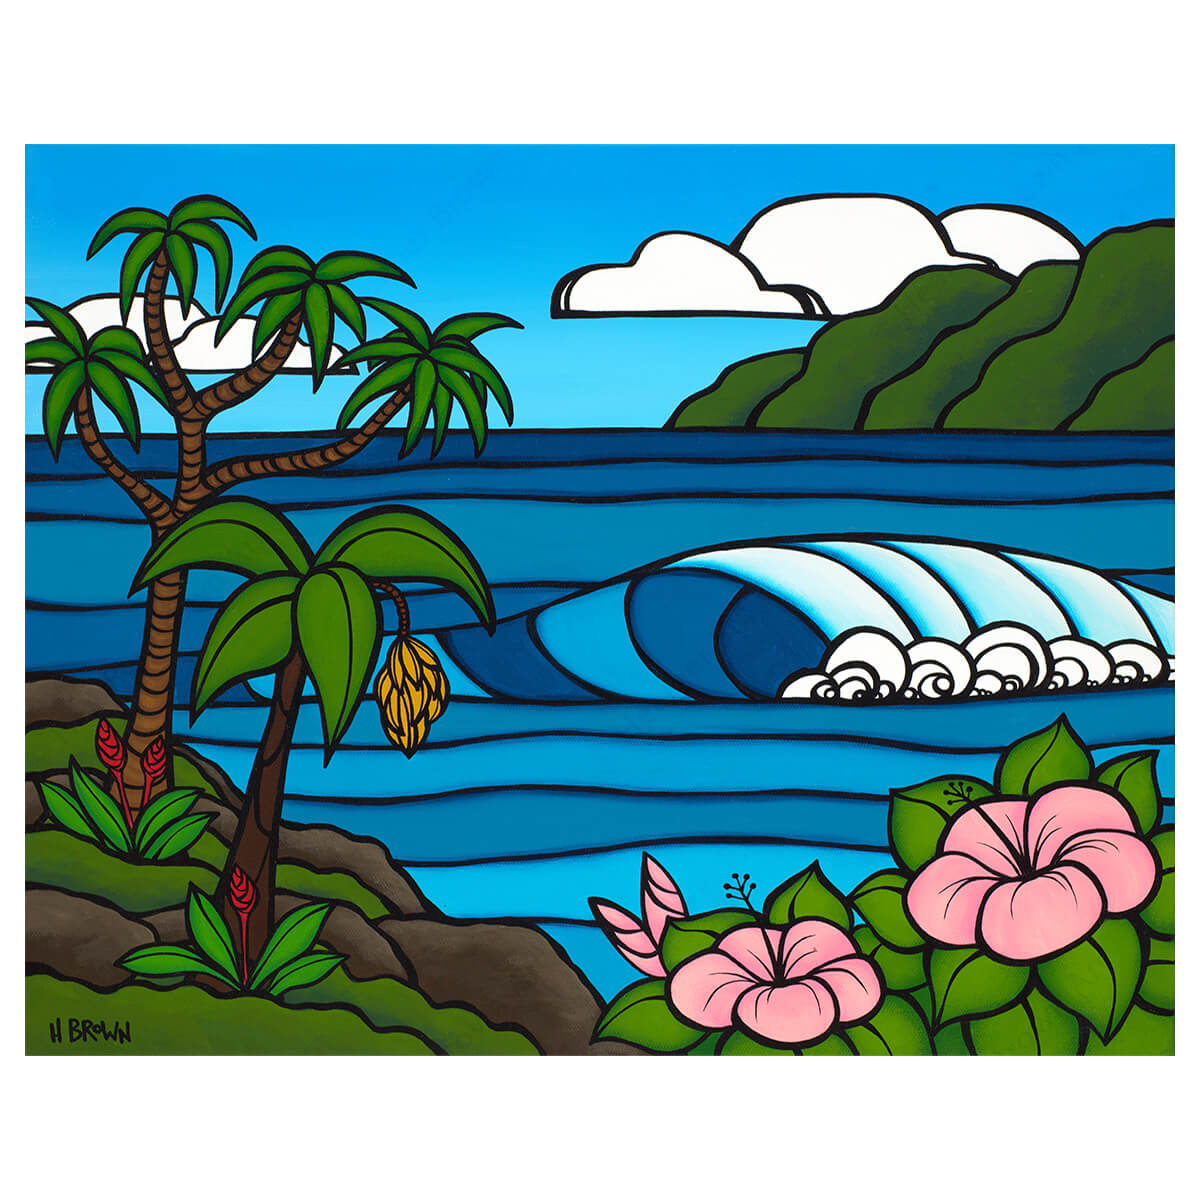 Colorful canvas artwork by Kauai artist Heather Brown featuring a serene Hawaii seascape with a cresting wave, framed by pink hibiscus flowers and a banana tree with green mountains in the distance.